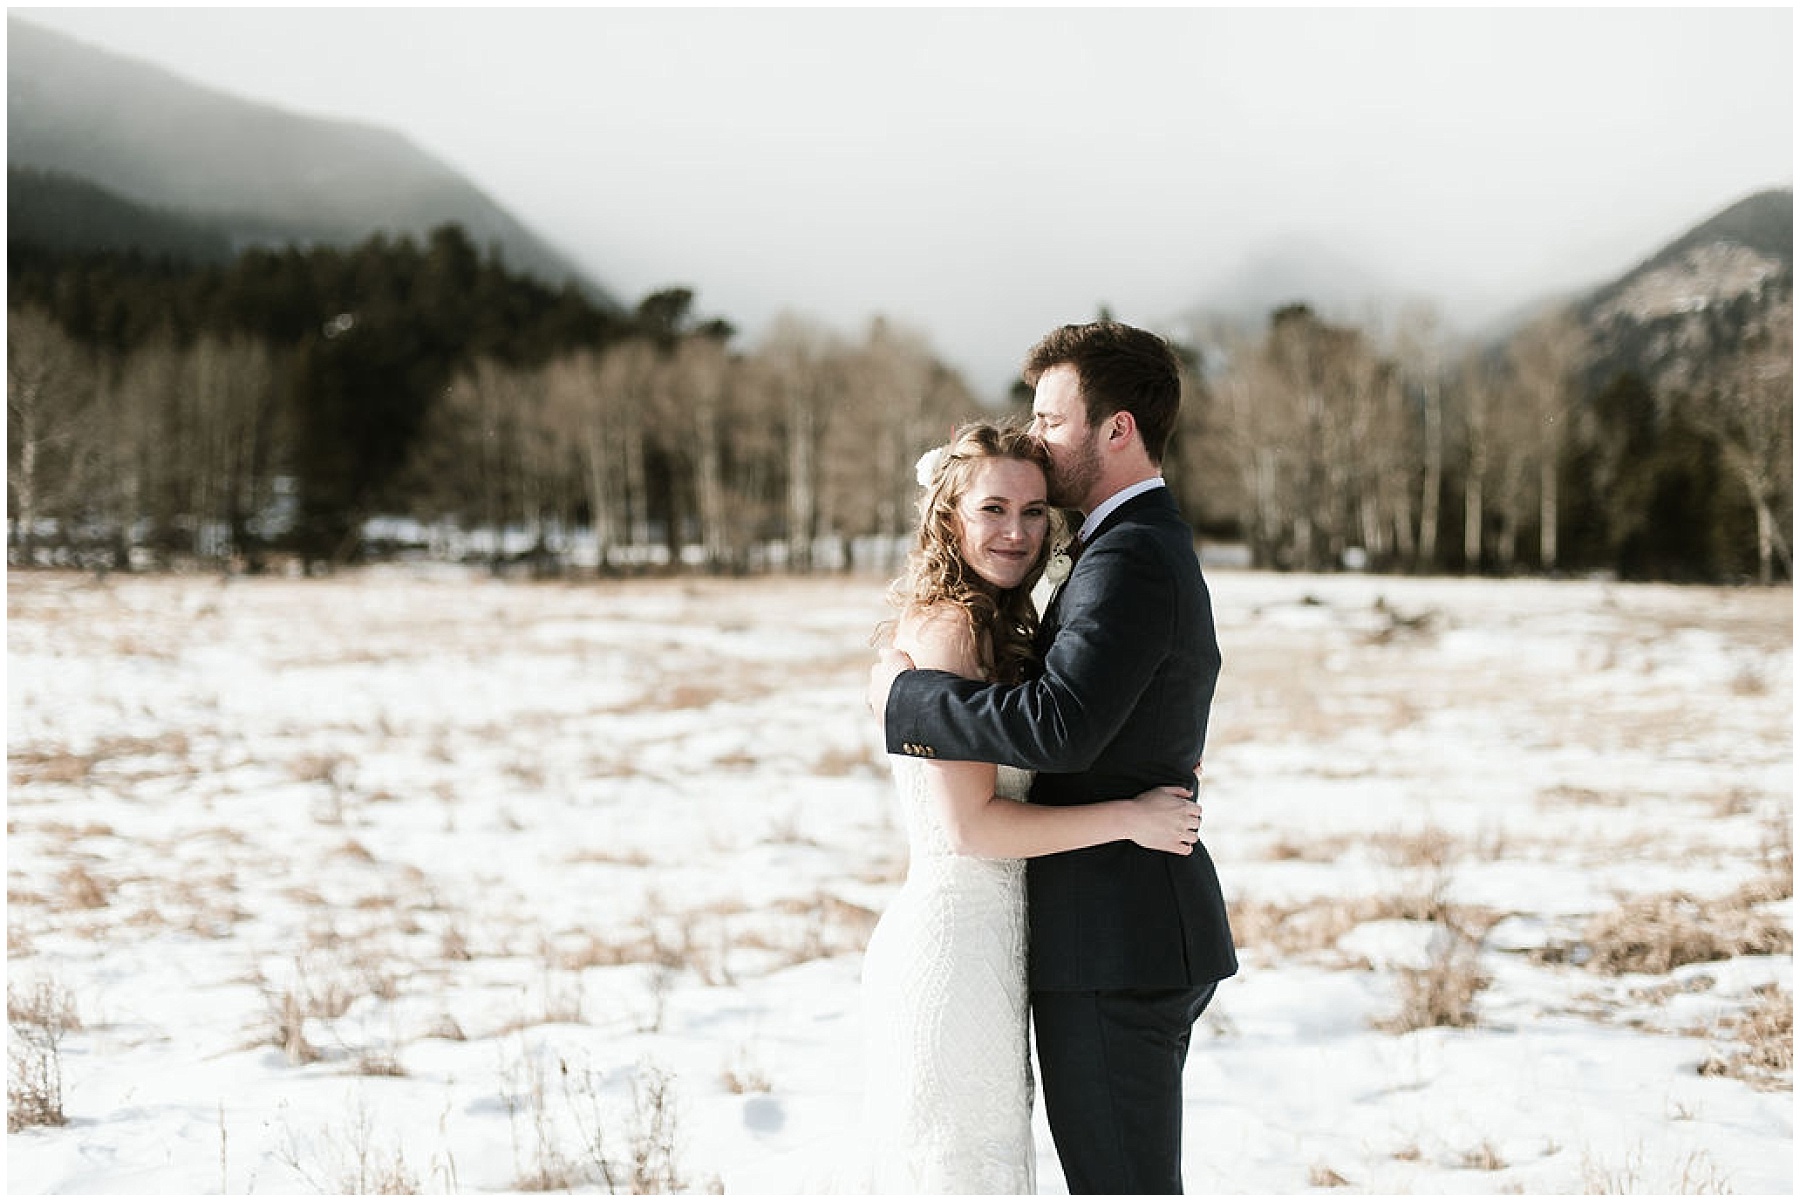 Katesalleyphotography-150_Haley and Dan get married in Estes Park.jpg